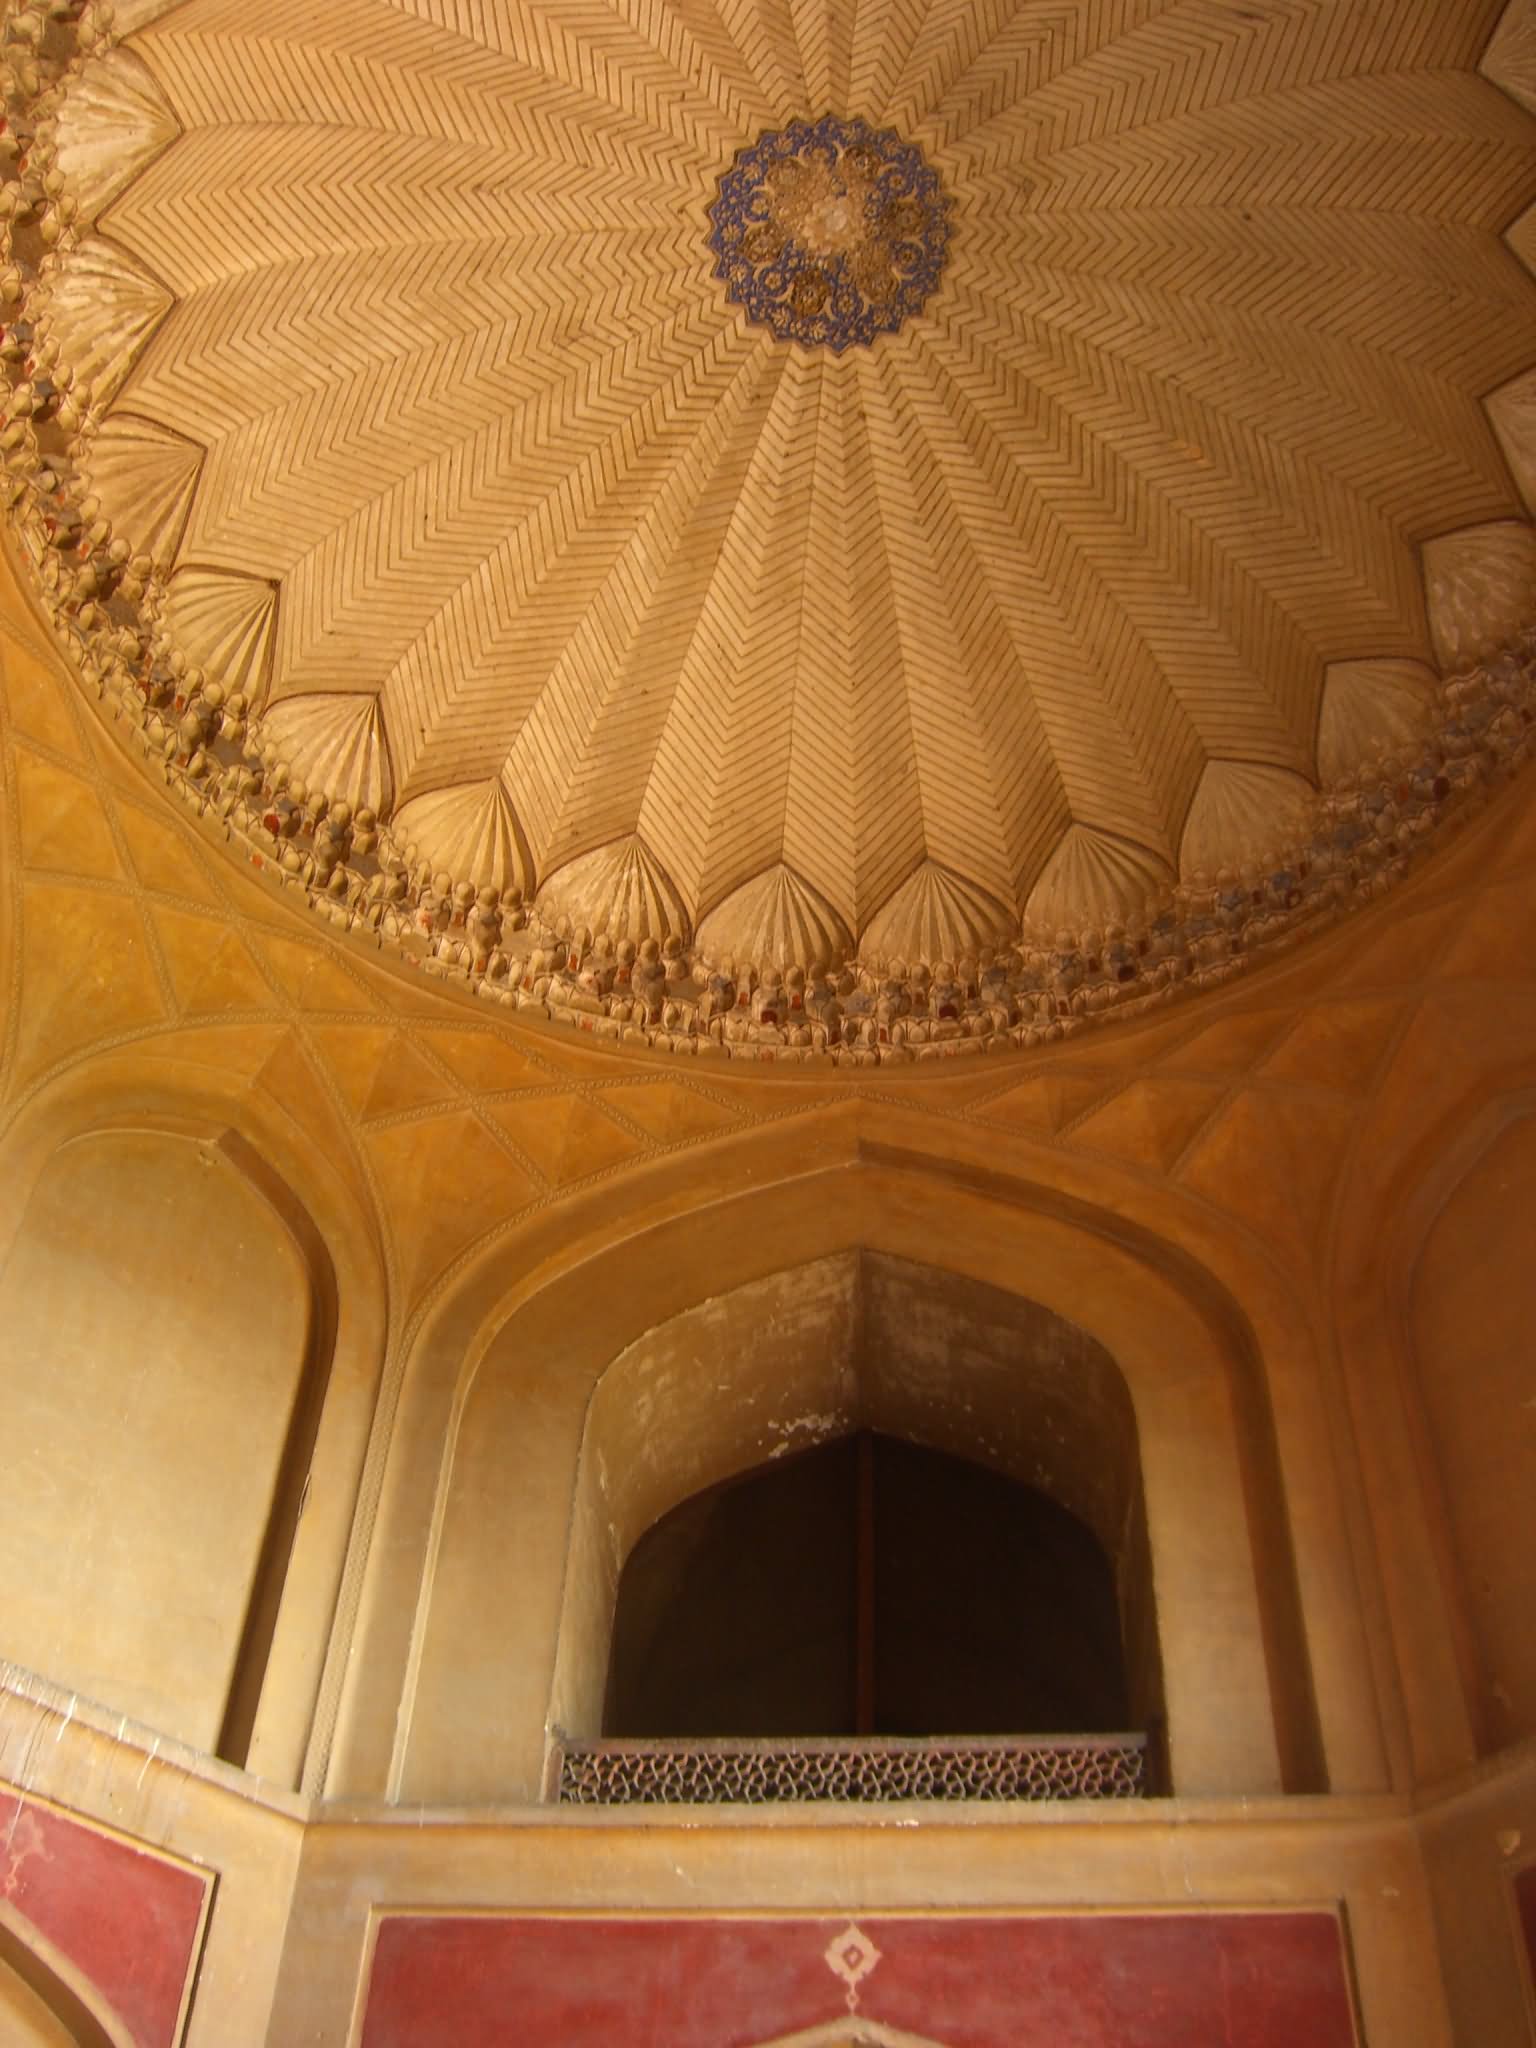 Inside View Of The Dome Of Humayun's Tomb